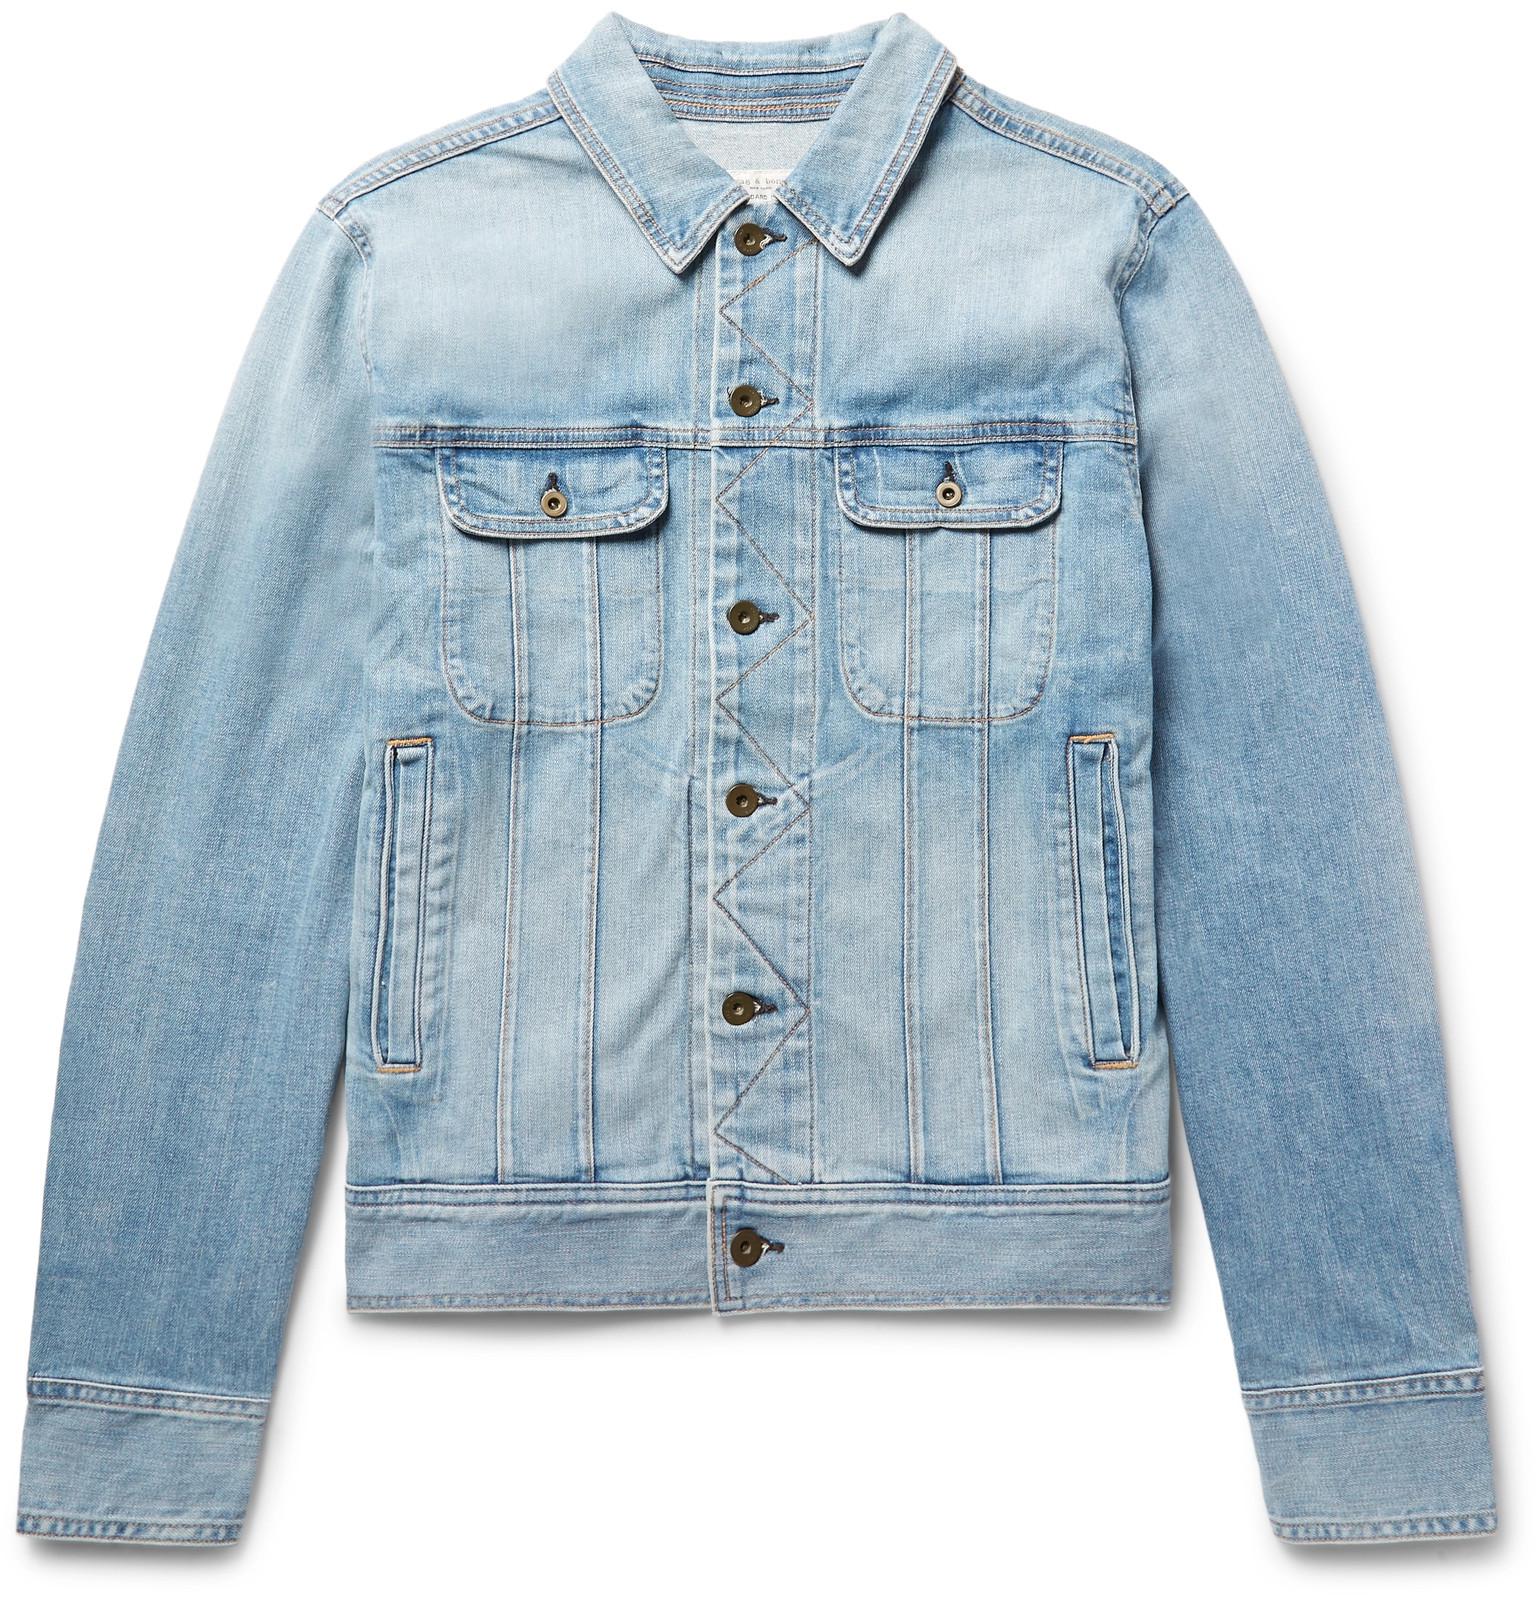 faded jeans jacket